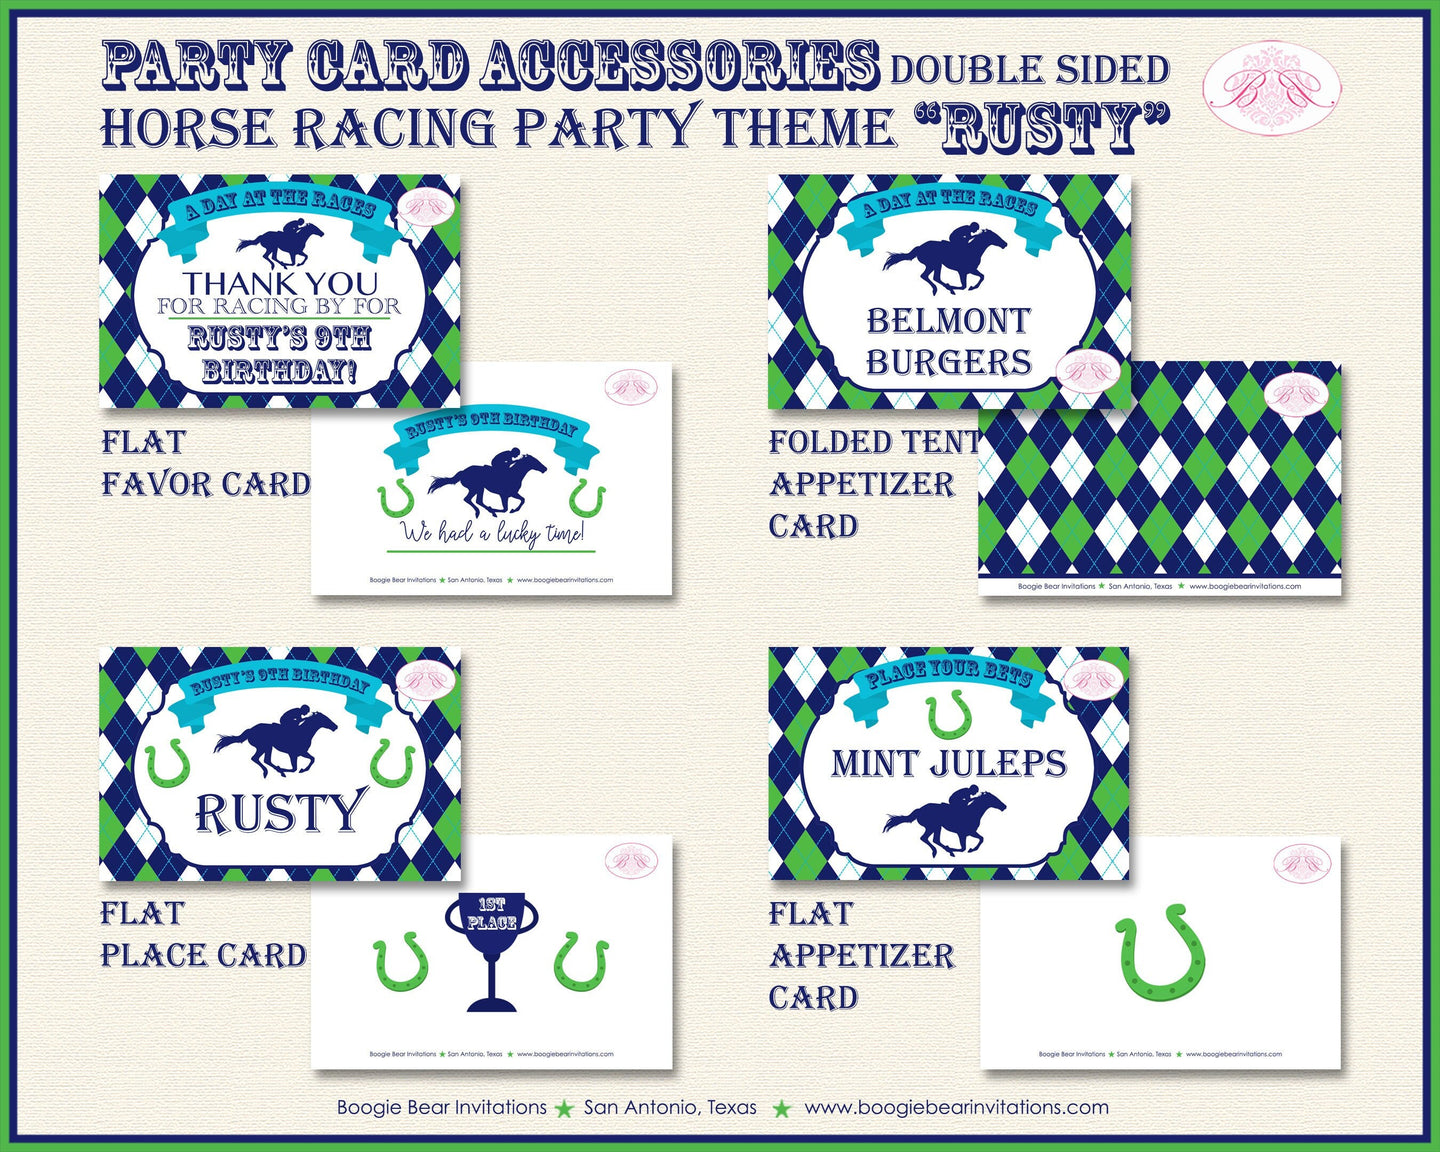 Horse Racing Birthday Party Favor Card Tent Appetizer Place Sign Green Blue Kentucky Derby Jockey Track Boogie Bear Invitations Rusty Theme